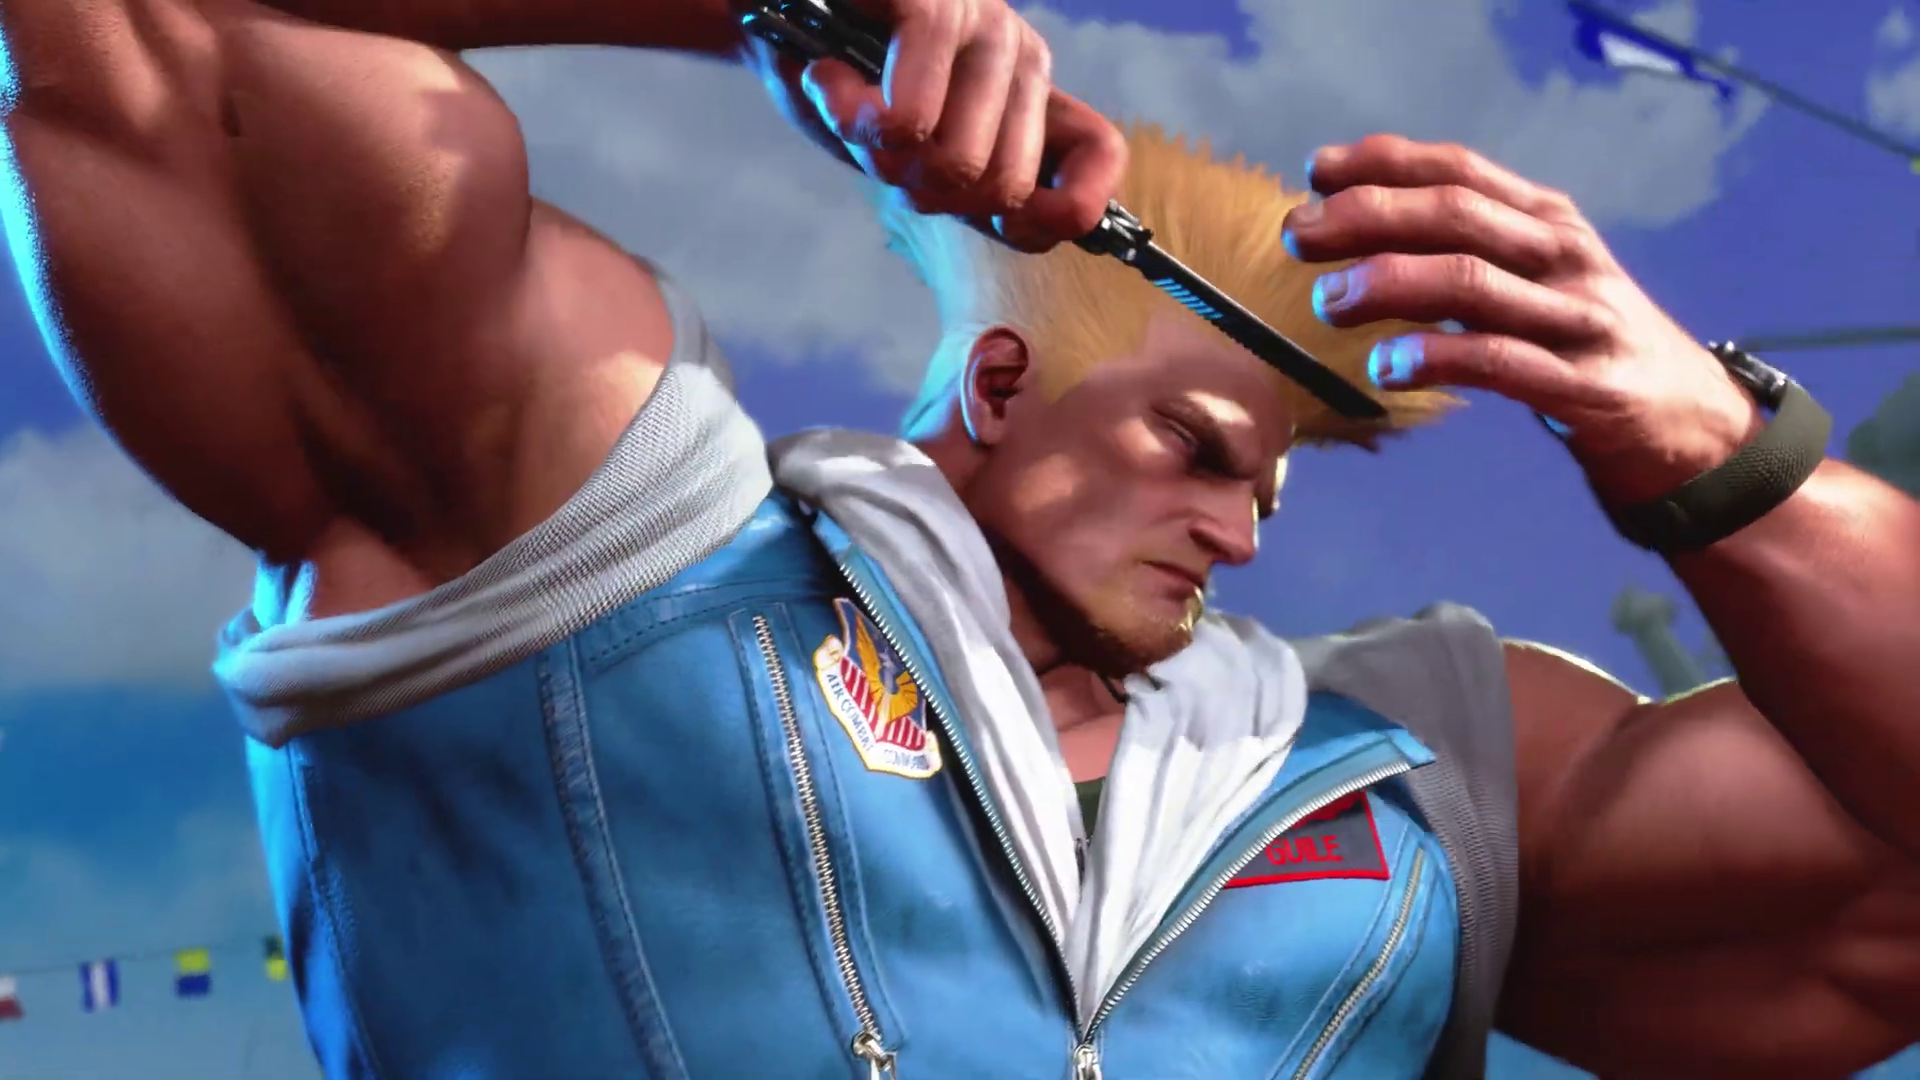 Guile Announced For Street Fighter 6 - Cinelinx